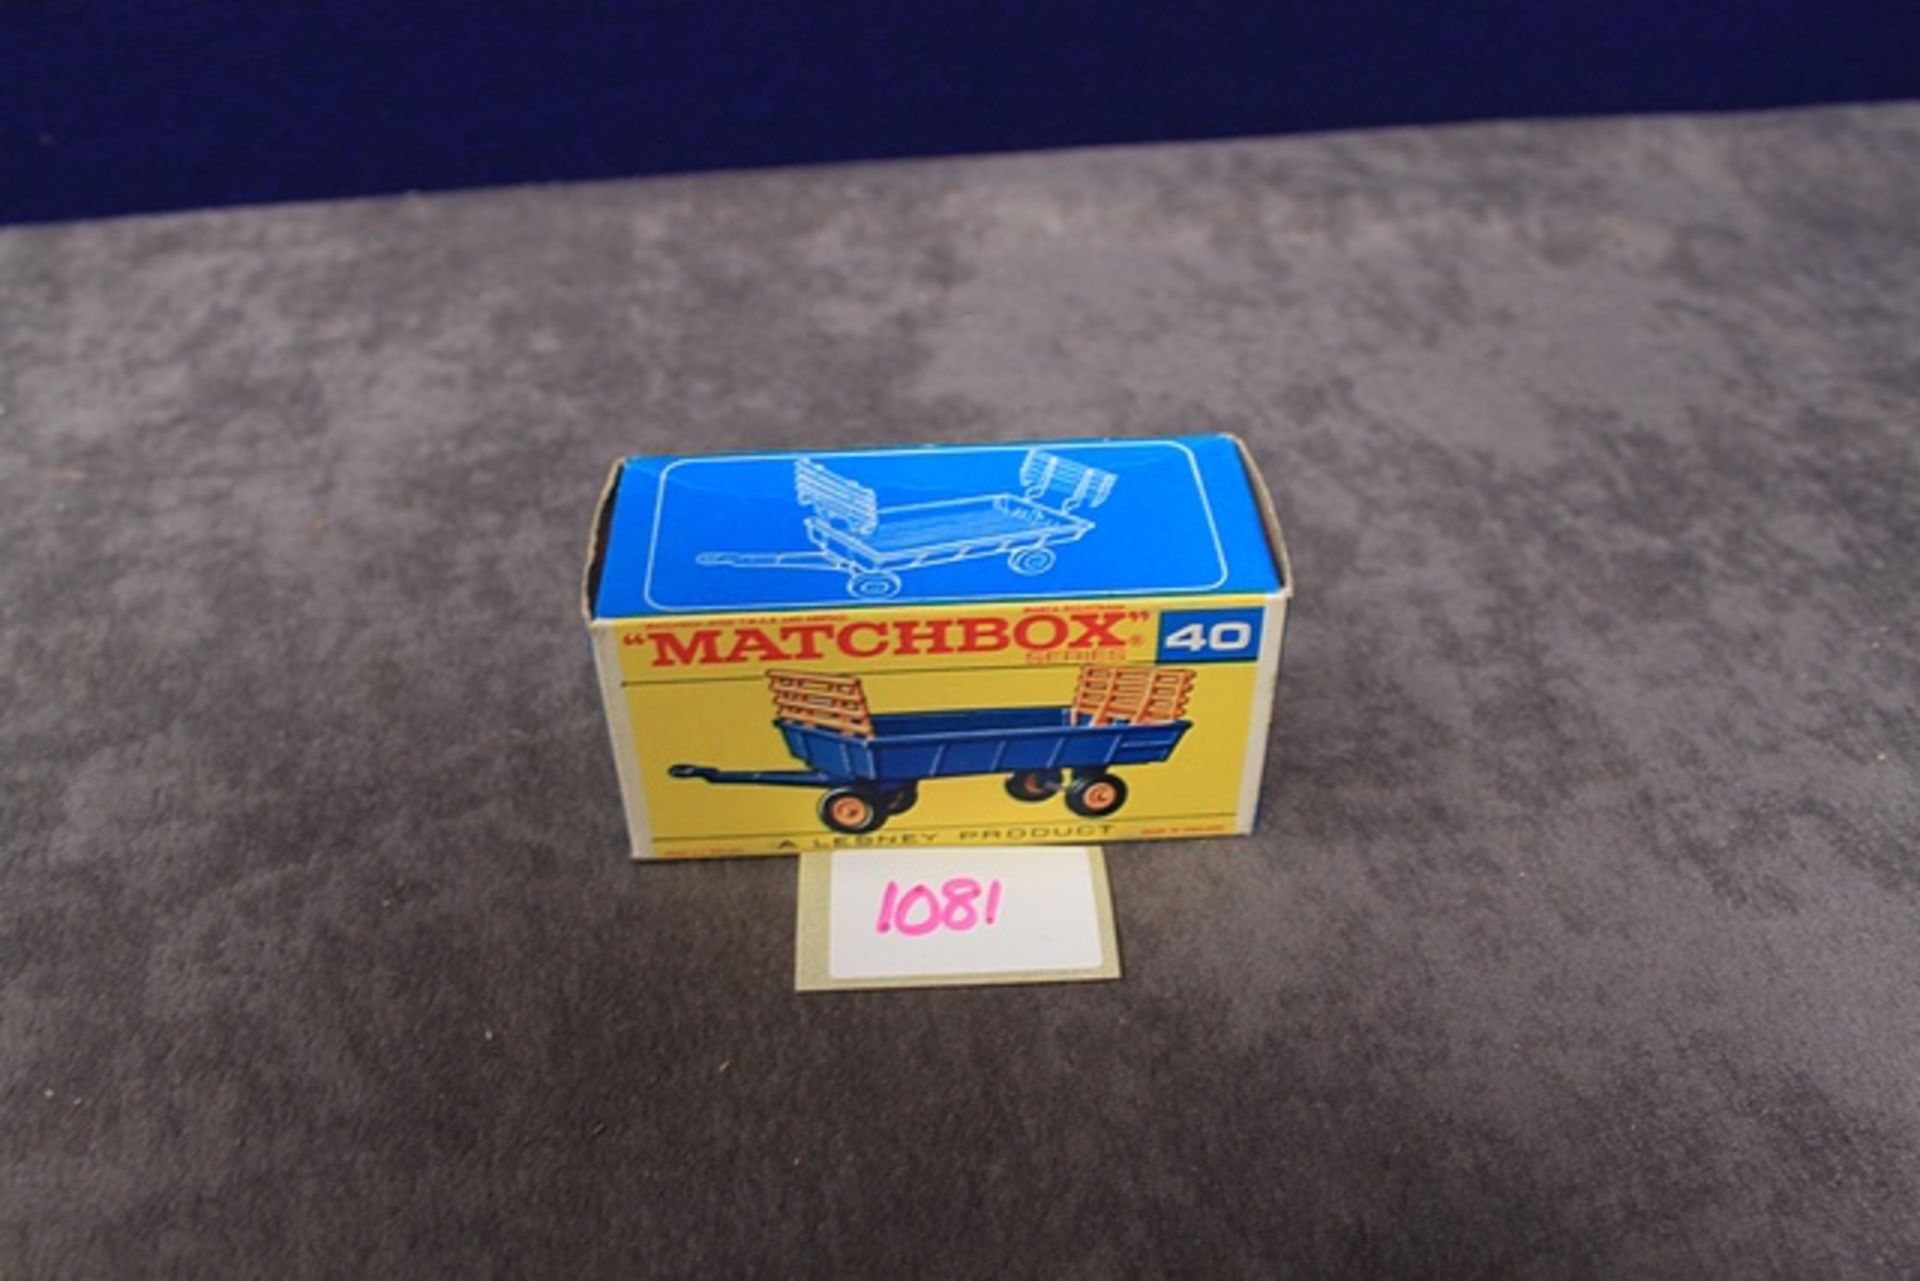 Mint Matchbox A Lesney Product #40 hay trailer in crisp Box - Image 2 of 3